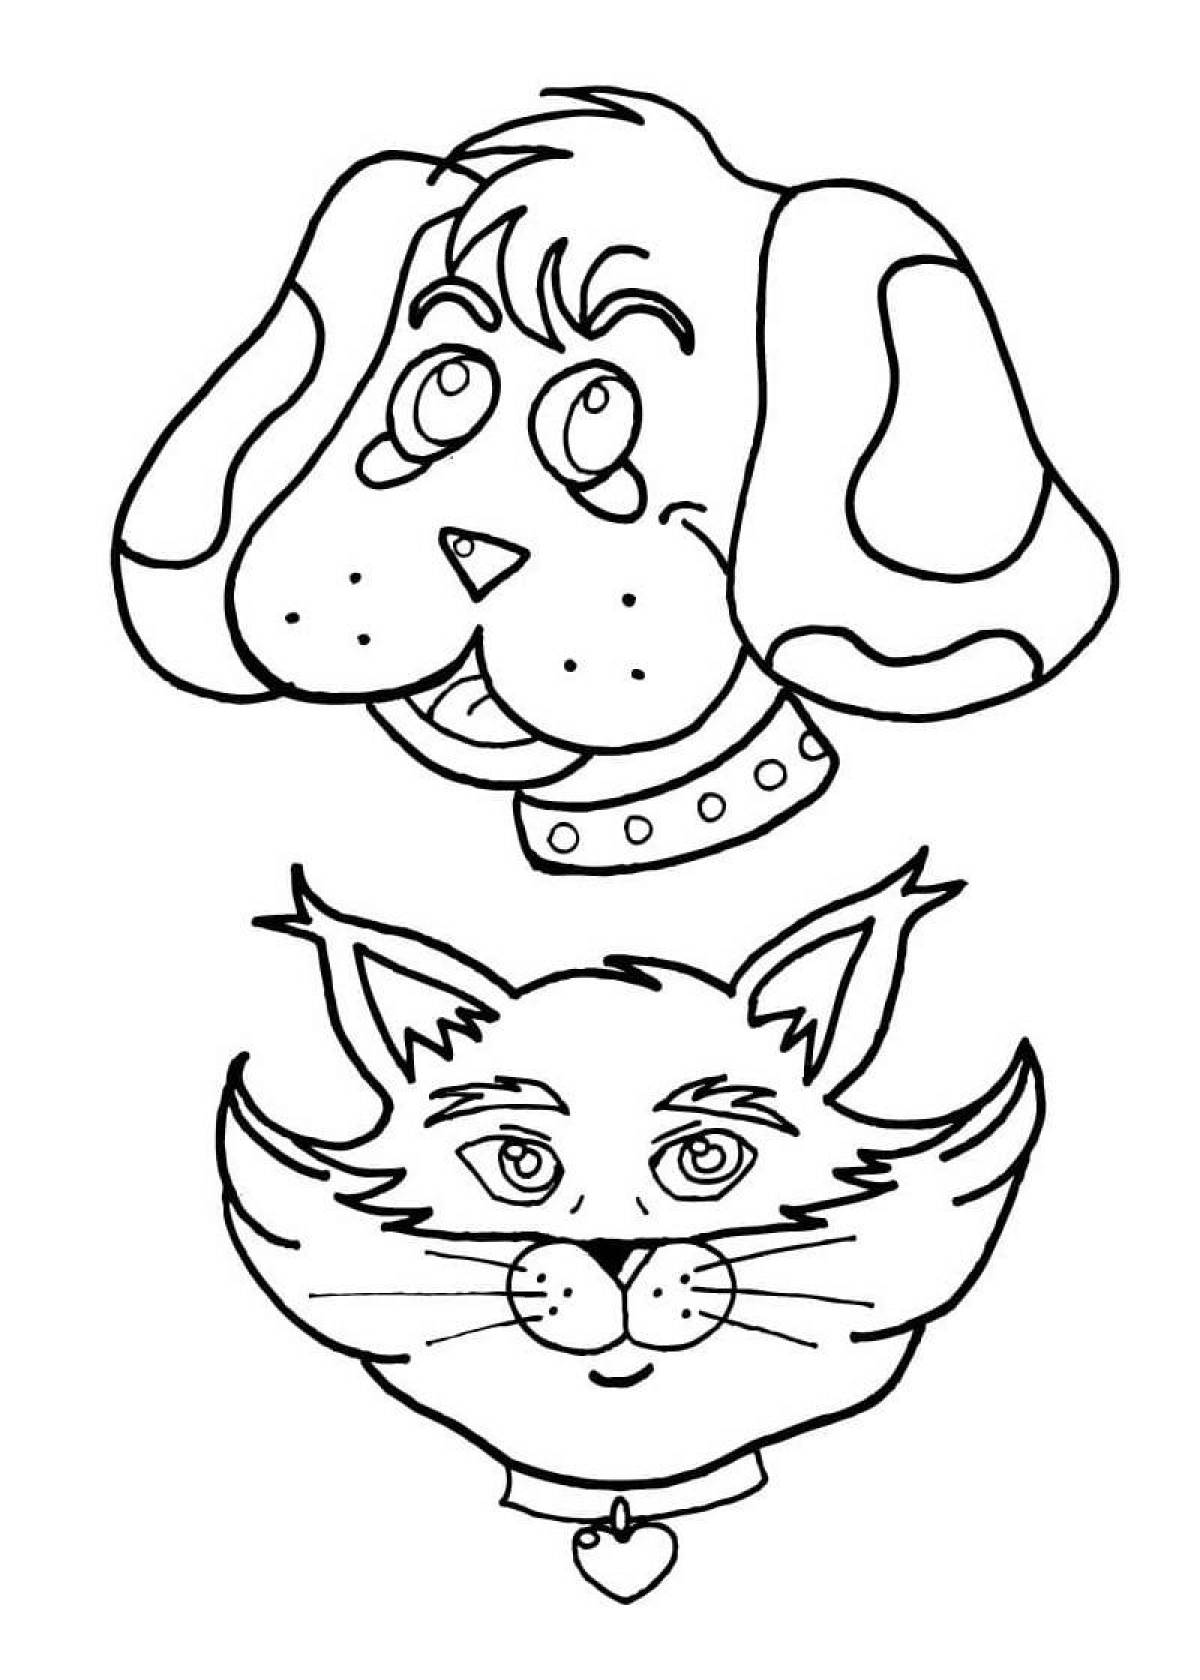 Coloring page bubble dog and cat